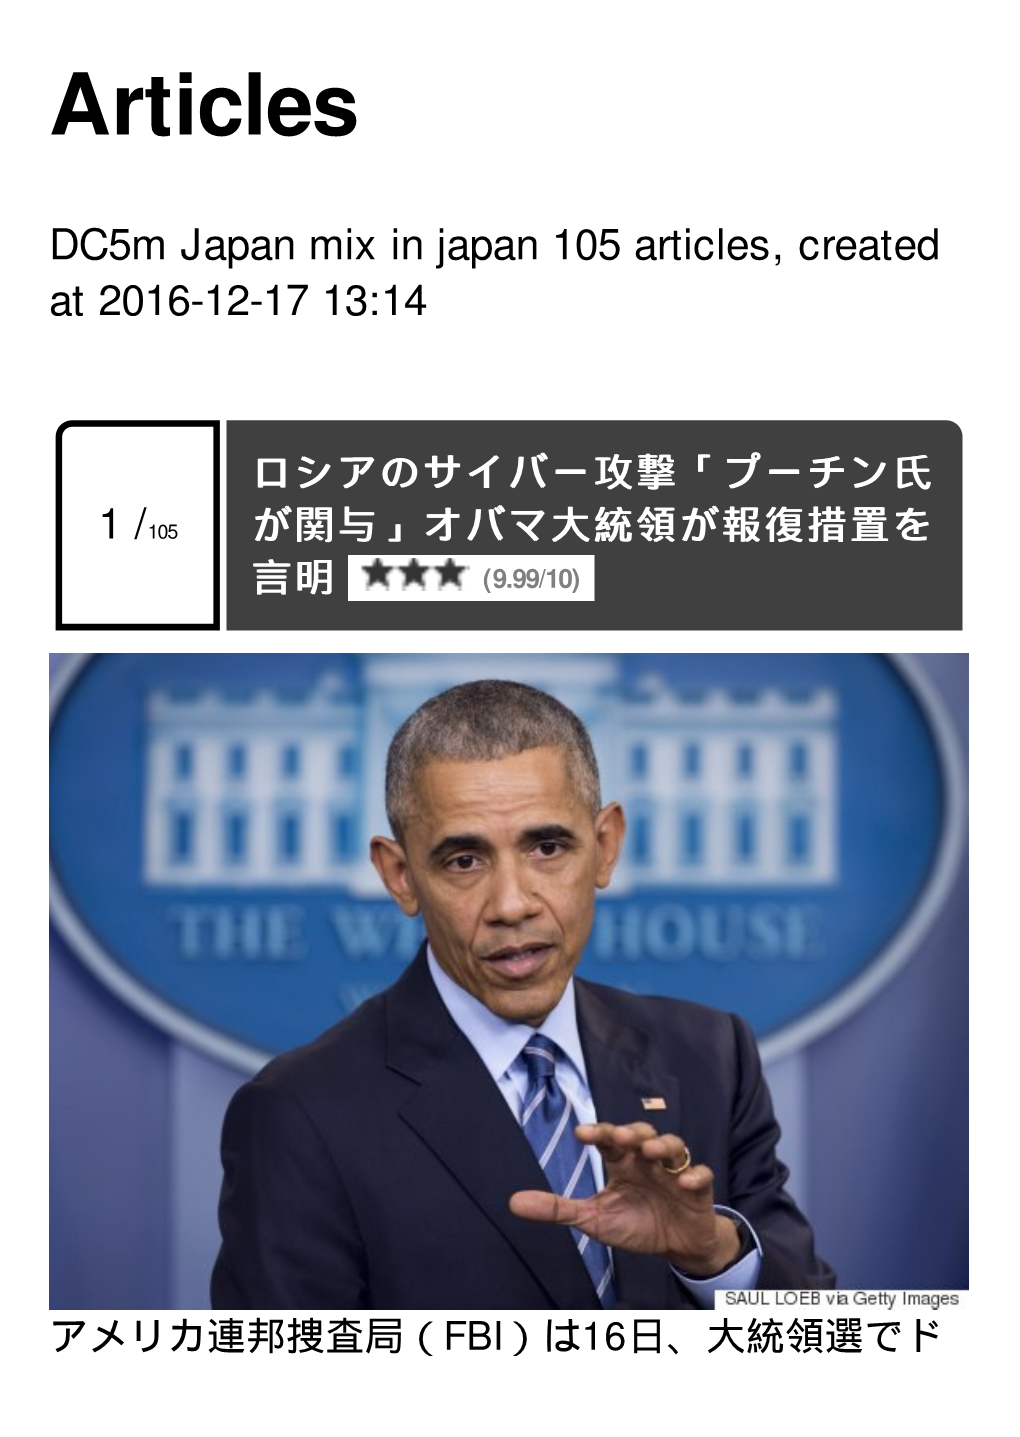 Dc5m Japan Mix in Japan Created At